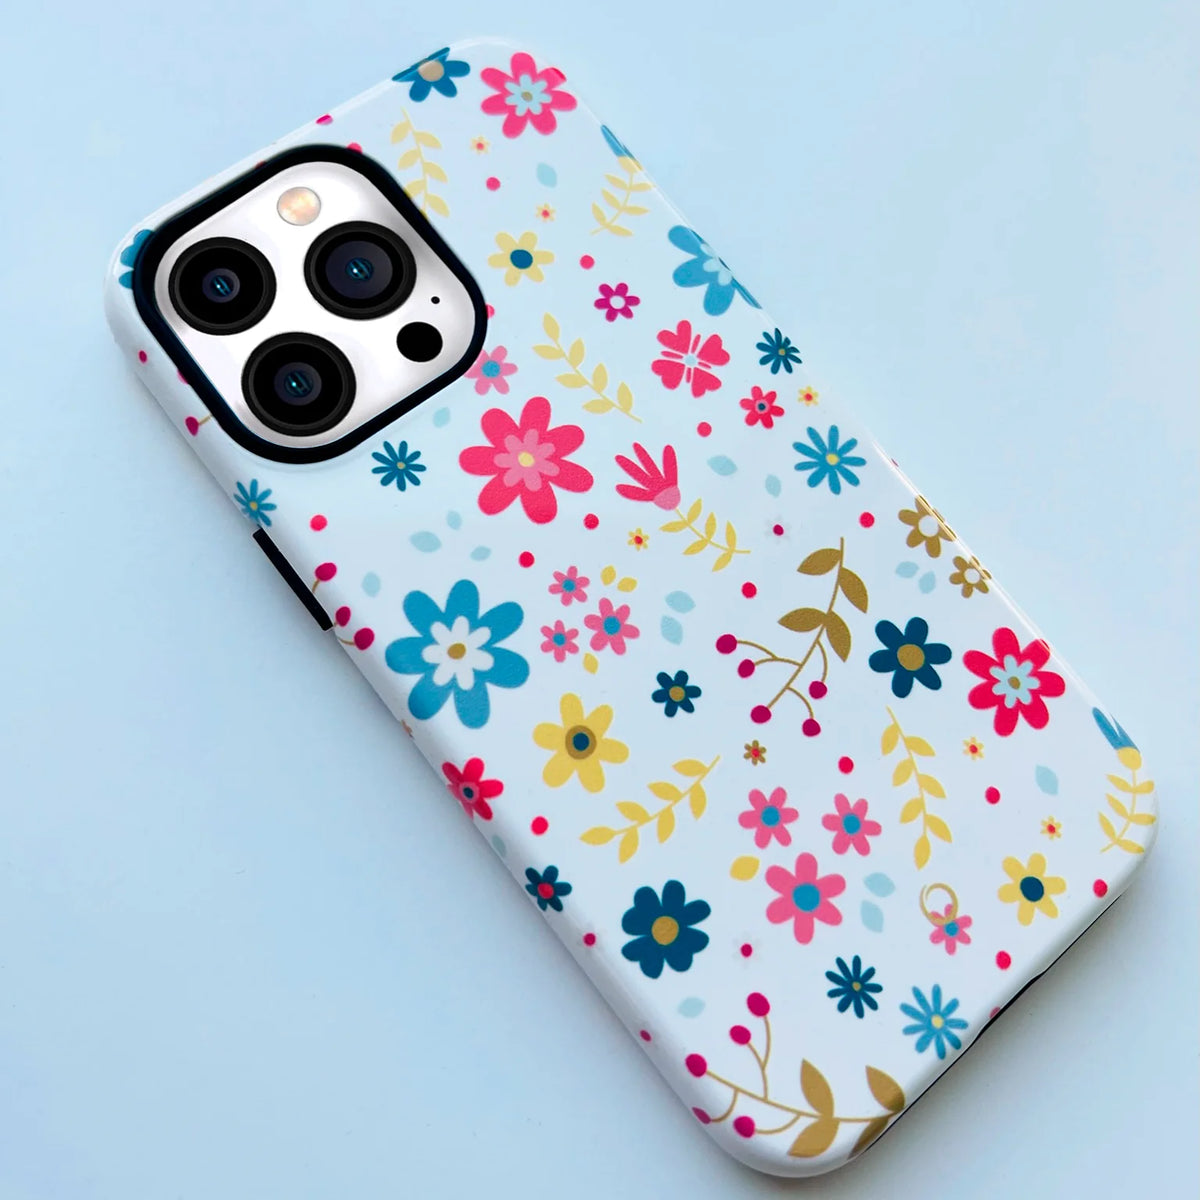 Garden Whispers iPhone Case - iPhone 12 Pro Max